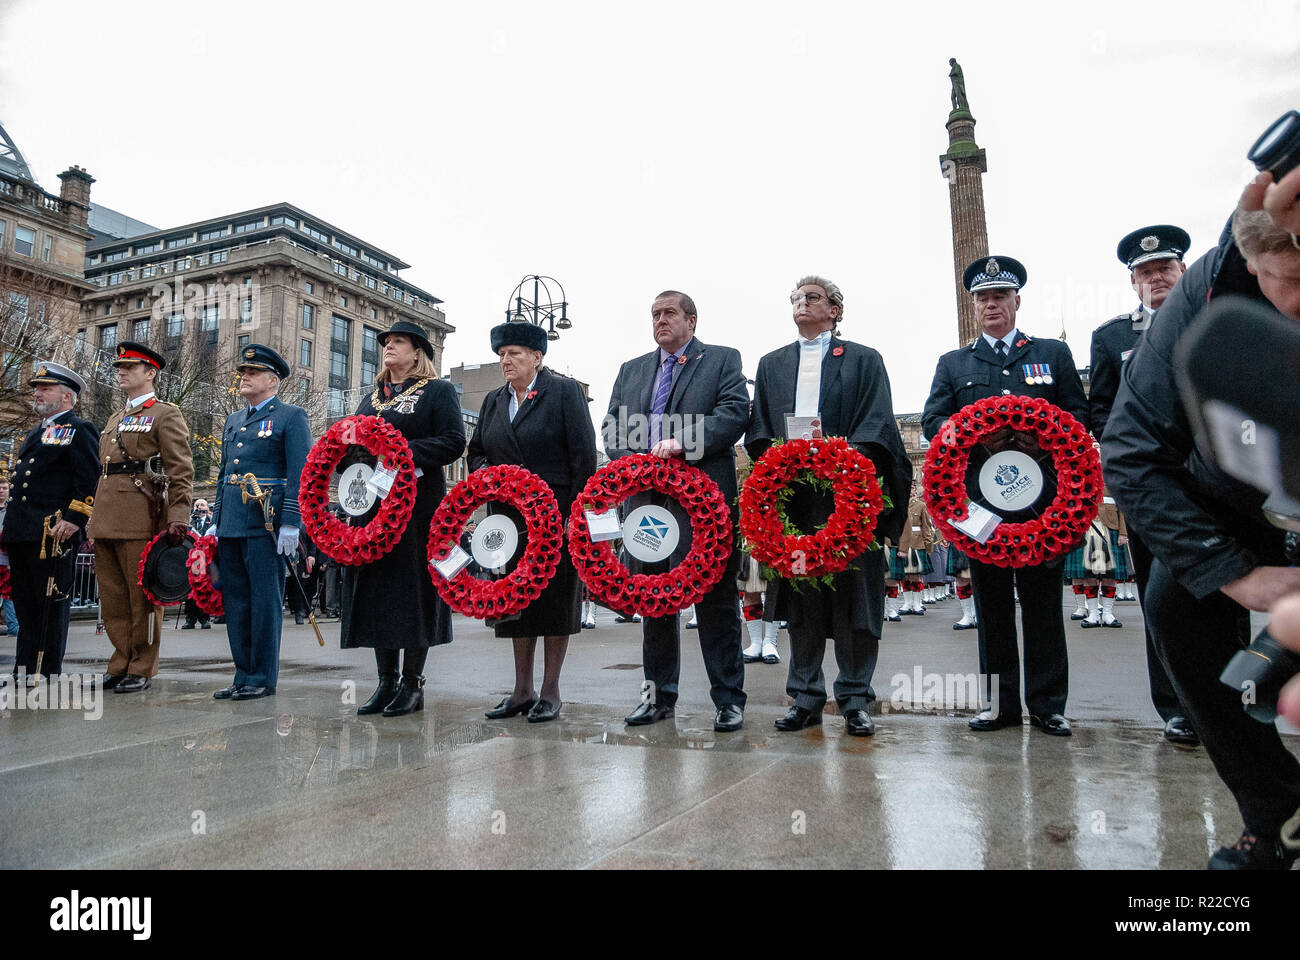 Glasgow, Renfrewshire, UK. 11th Nov, 2018. High ranking officials from various services and forces are seen standing before the Cenotaph with wreaths to pay their respects to those who have fallen.Members of the UK armed forces, Police Scotland, Public and other services came out in support and to pay respects to those that have fallen in recent conflicts and to those that fell during the Great War. 2018 marked the 100th Year anniversary of WW1. Credit: Stewart Kirby/SOPA Images/ZUMA Wire/Alamy Live News Stock Photo